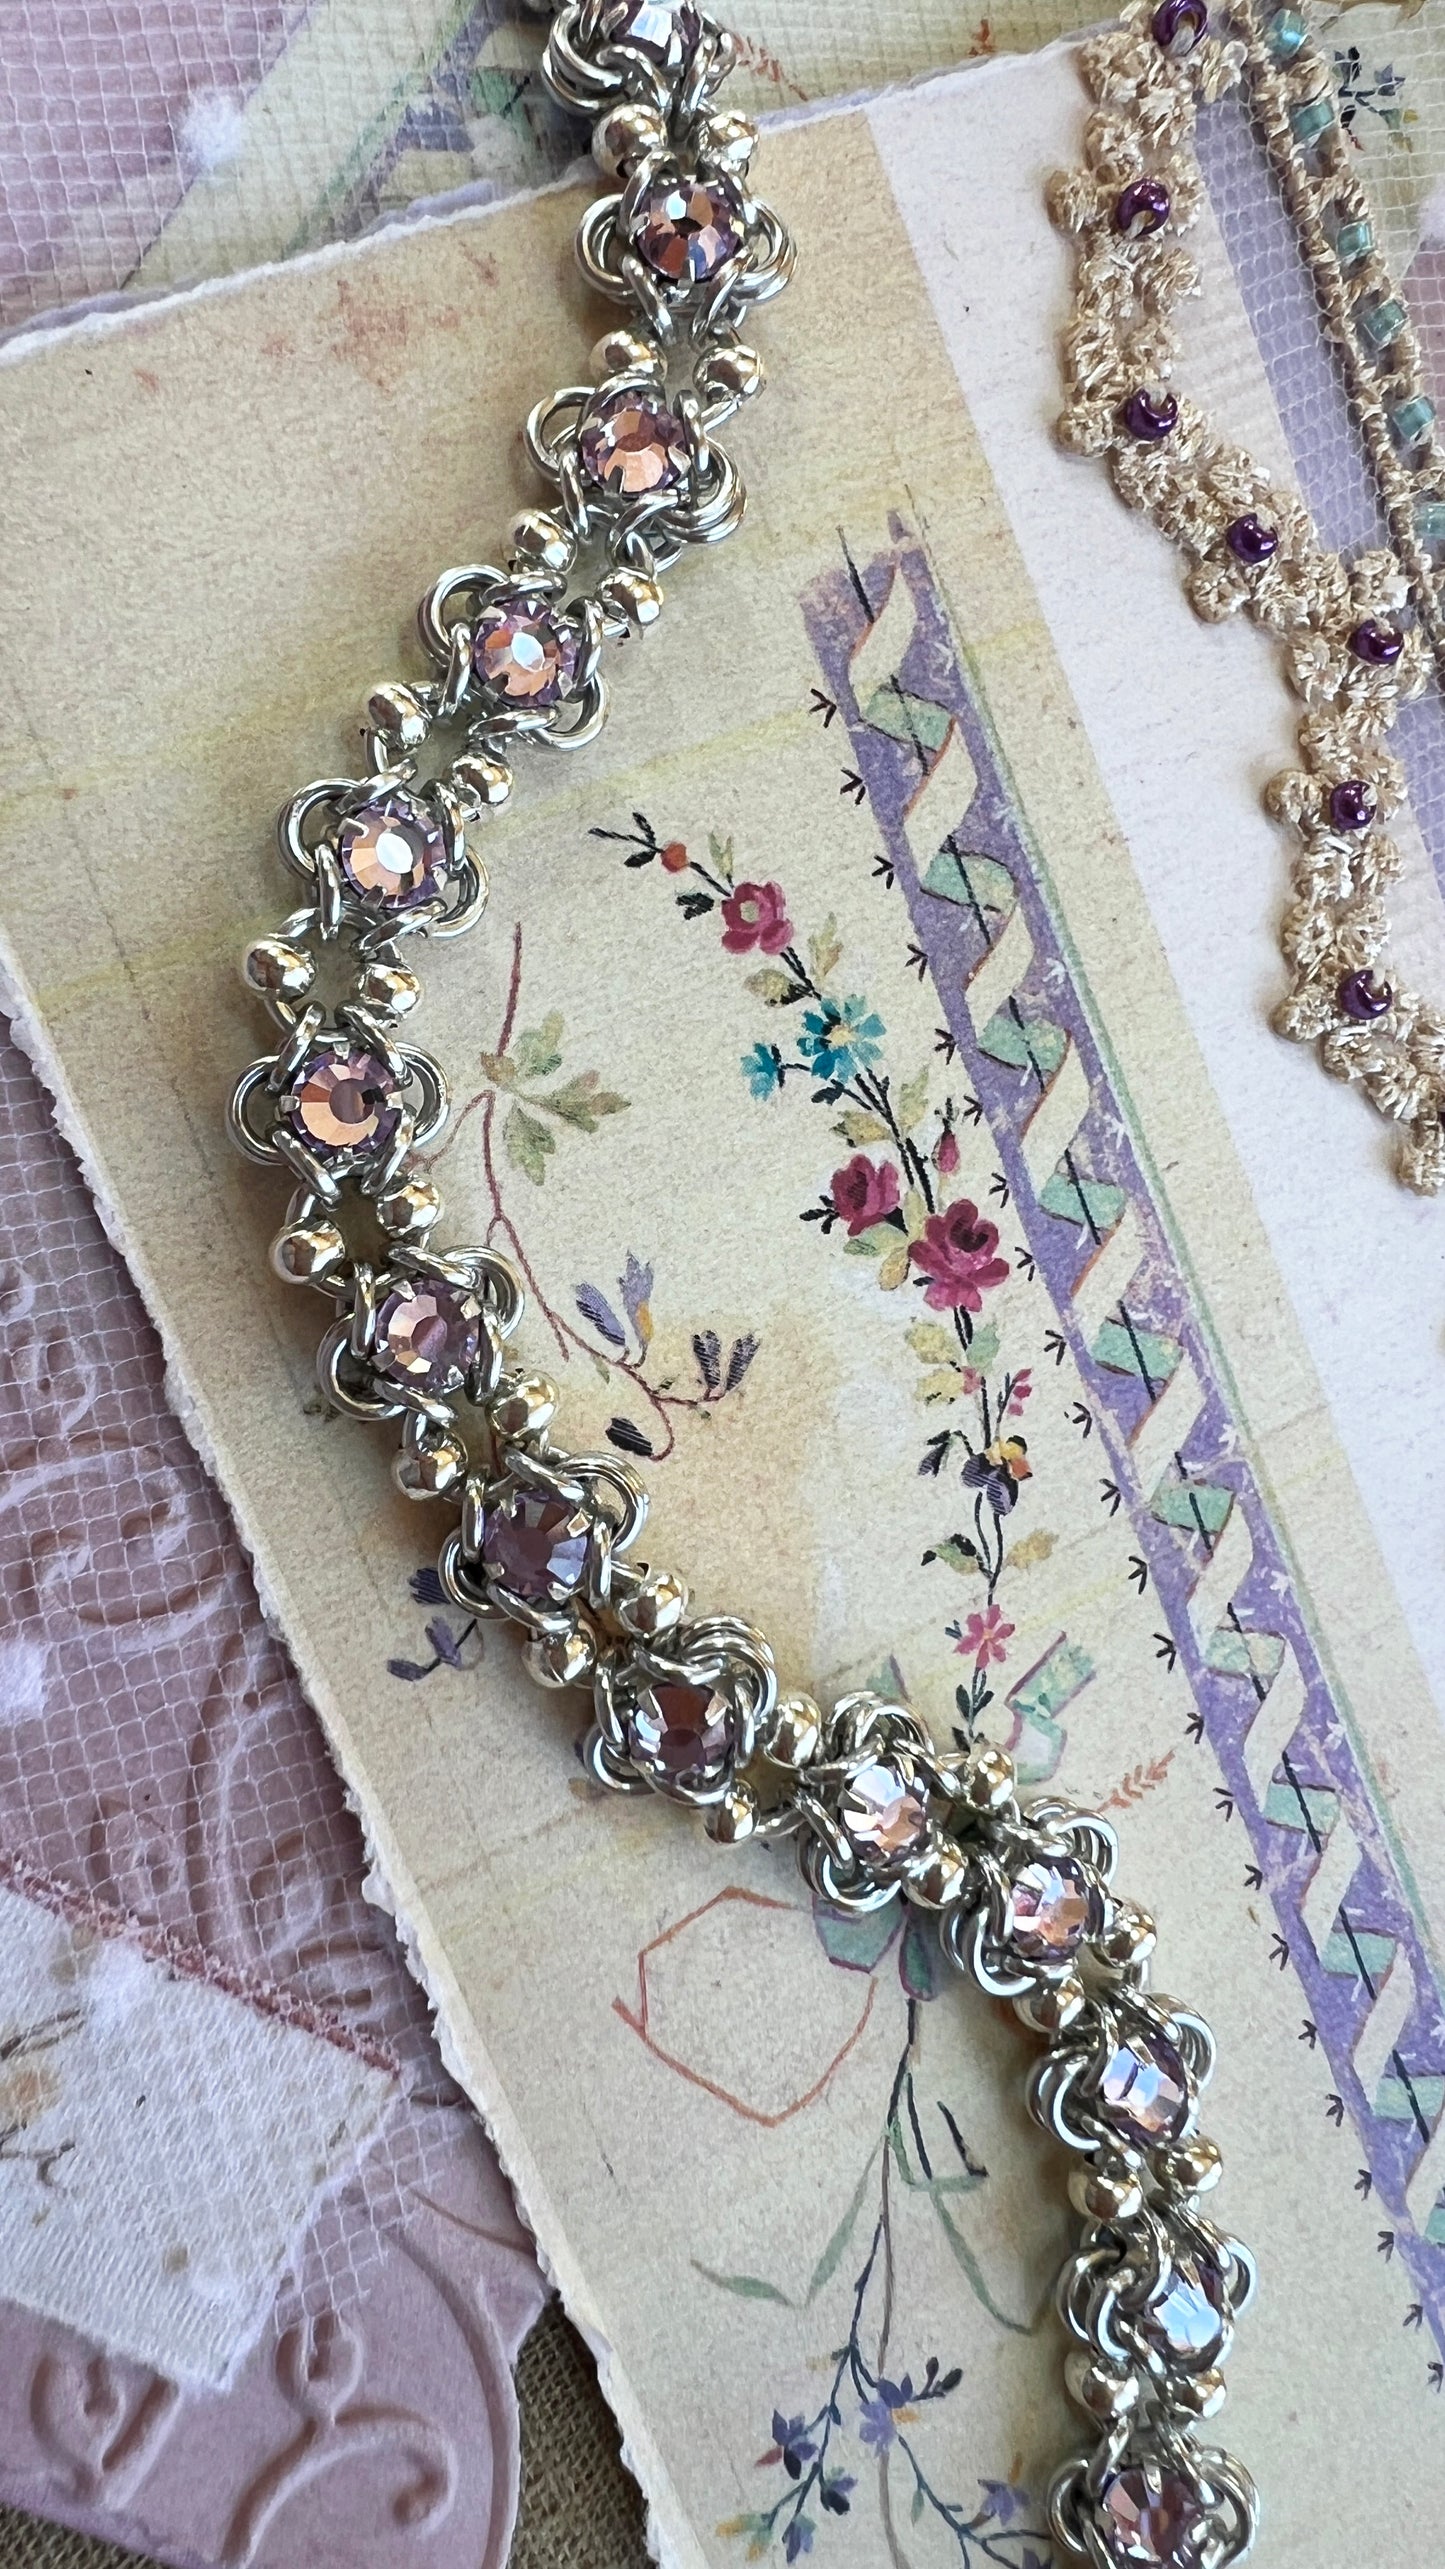 Reversible Rose Montee Beaded Bracelet Kit with Video Tutorial - Silver, Aquamarine and Violet